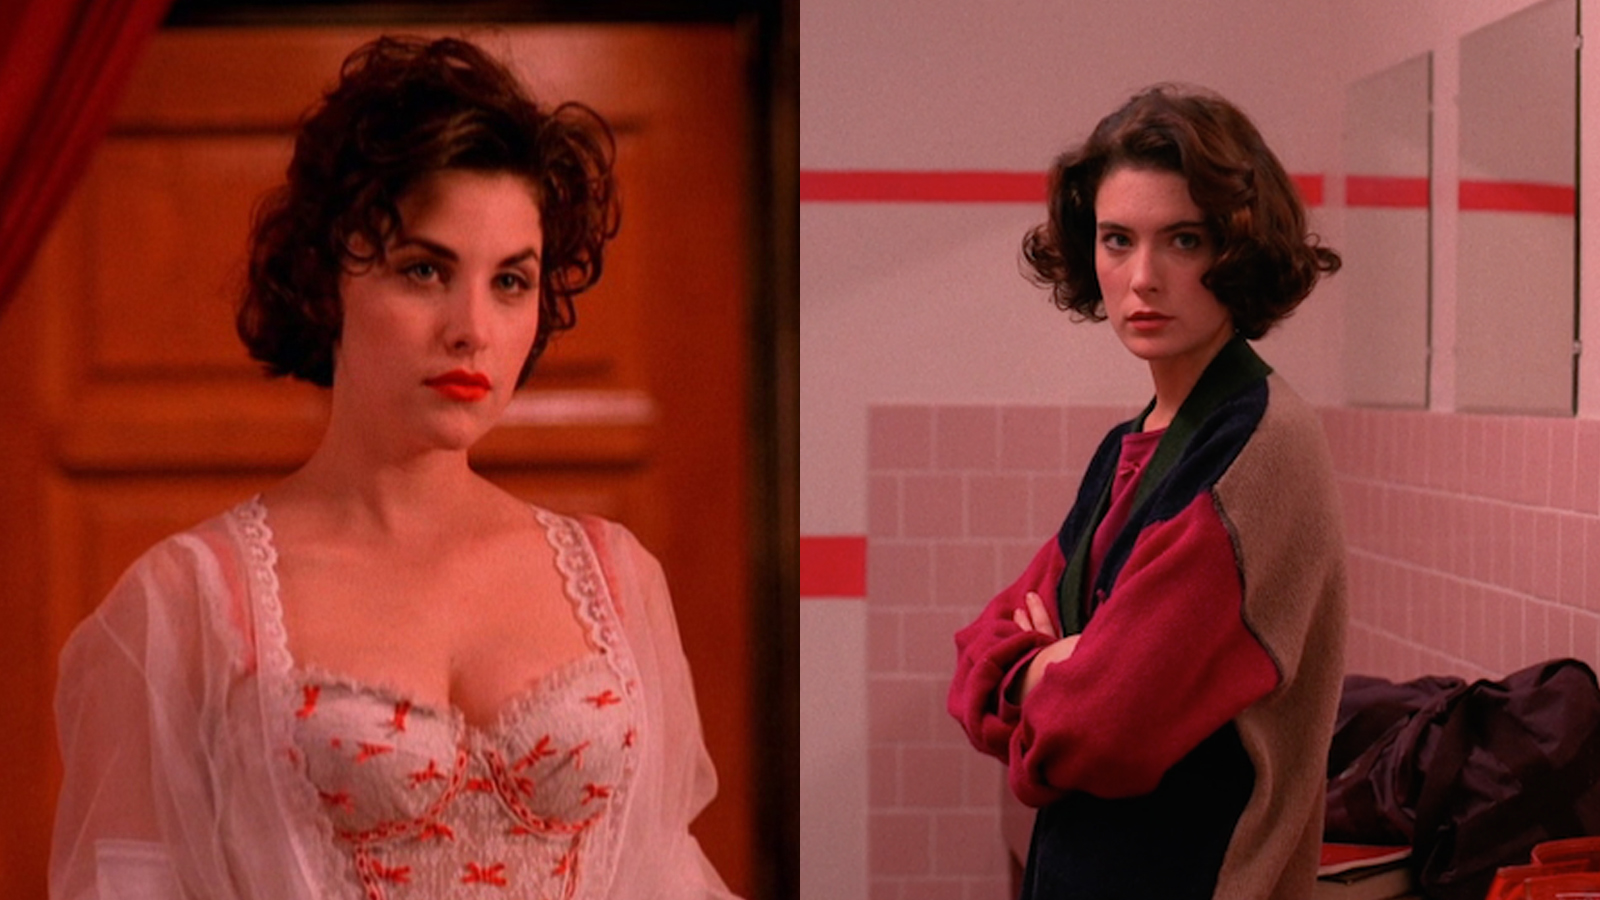 Twin Peaks Fashion Is About to Have a Major Moment.